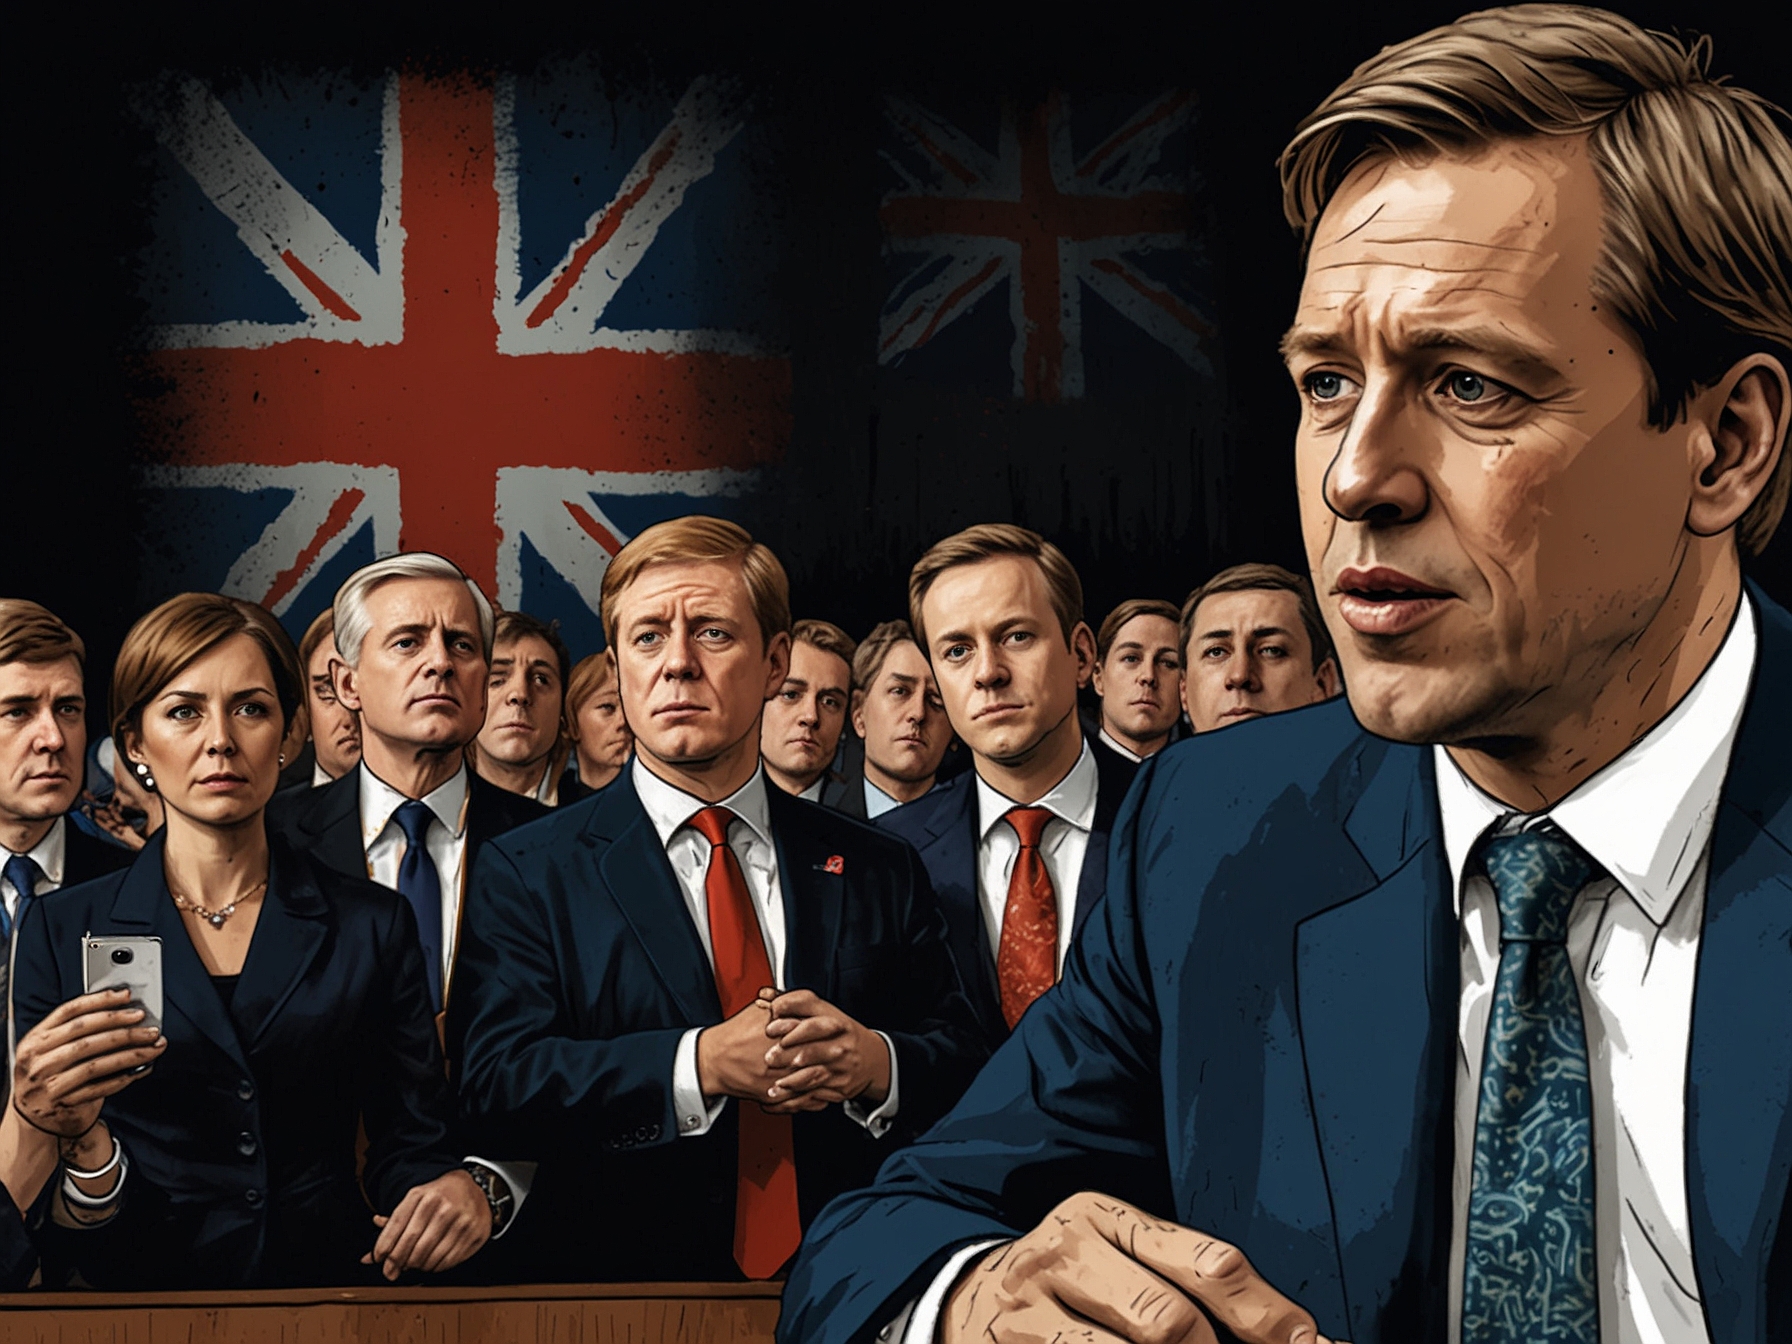 An illustration depicting the ongoing UK election campaign, highlighting the heated debates and controversies surrounding betting practices that have influenced public opinion and voter behavior.